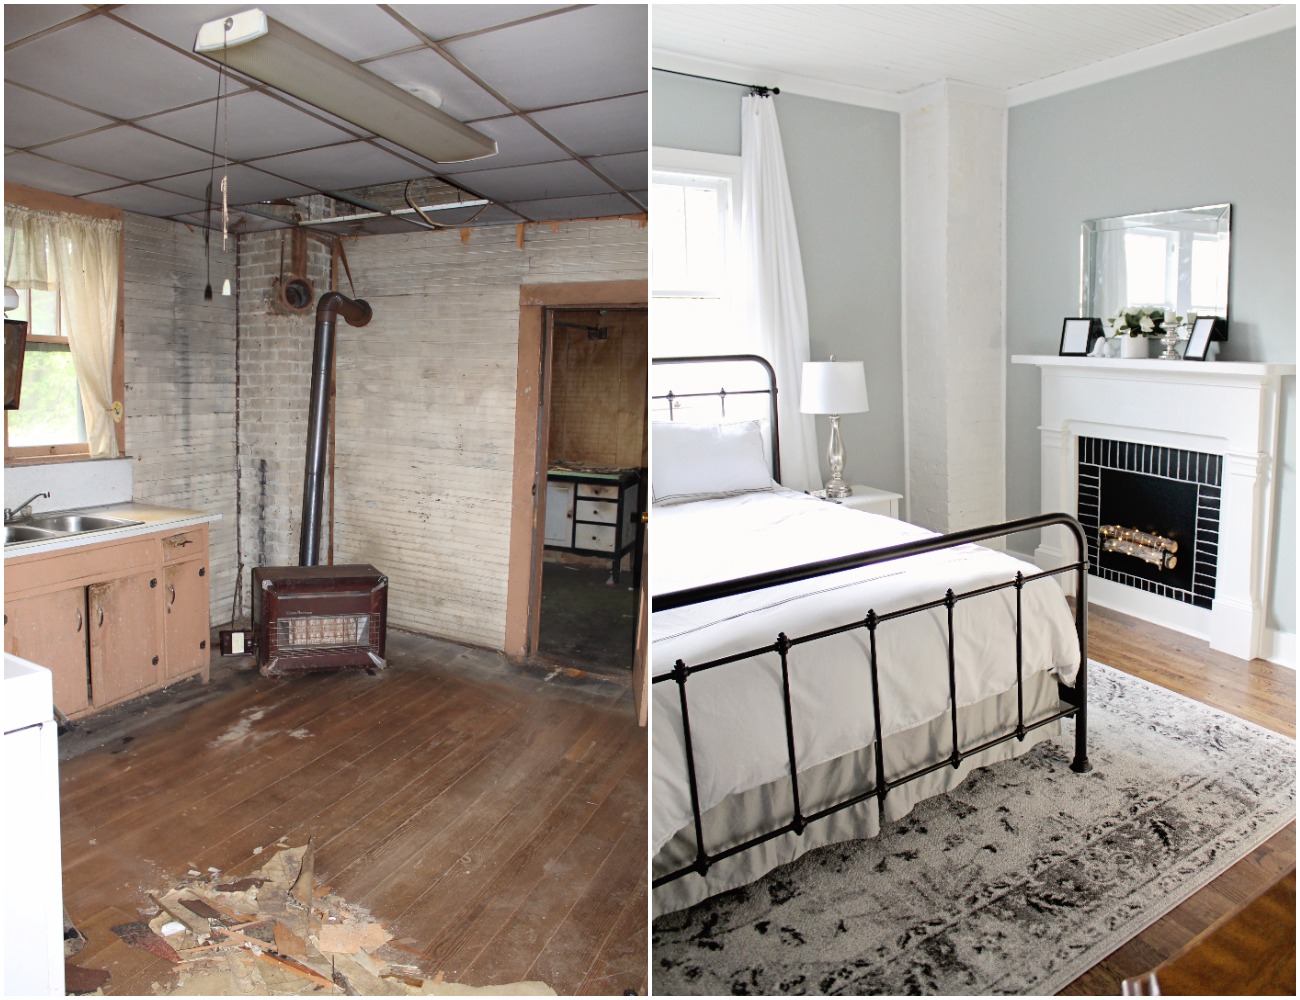 Elizabeth Burns Design  Budget-Friendly Fixer Upper Farmhouse Before and After House Flip - DIY Master Bedroom with Faux Fireplace, Chimney, and Bed Under Windows - Sherwin Williams Magnetic Gray (6).jpg